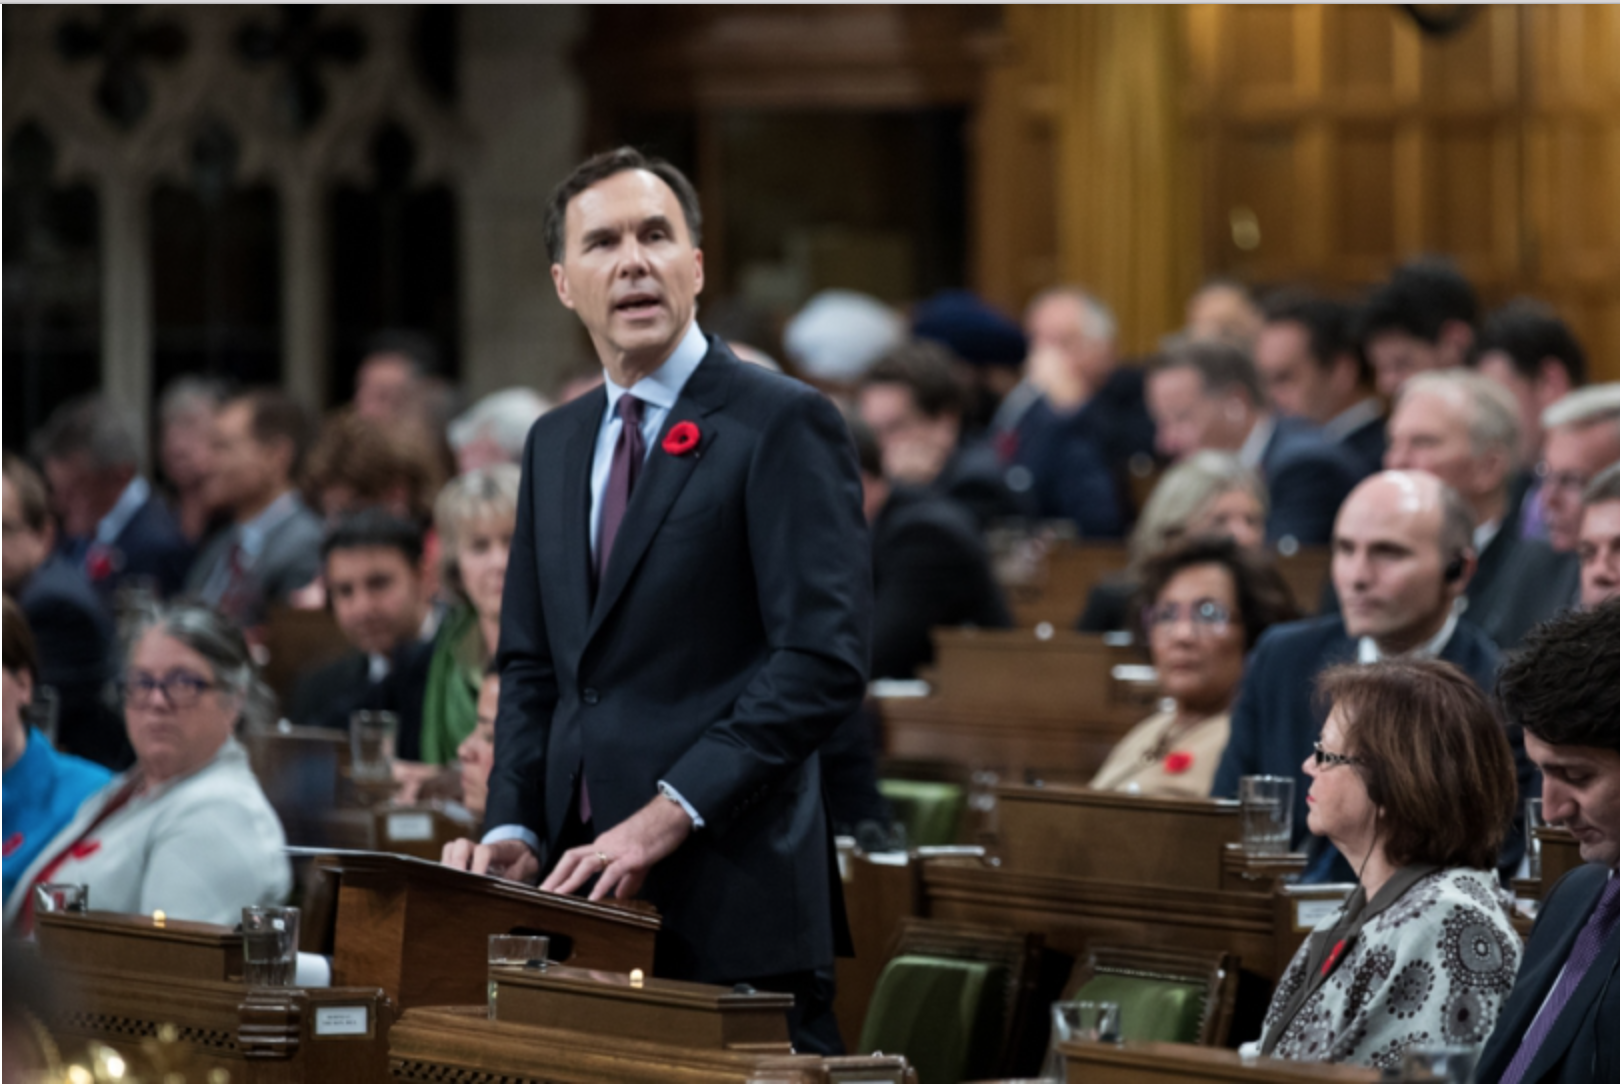 Minister Bill Morneau in the House of Commons in Ottawa